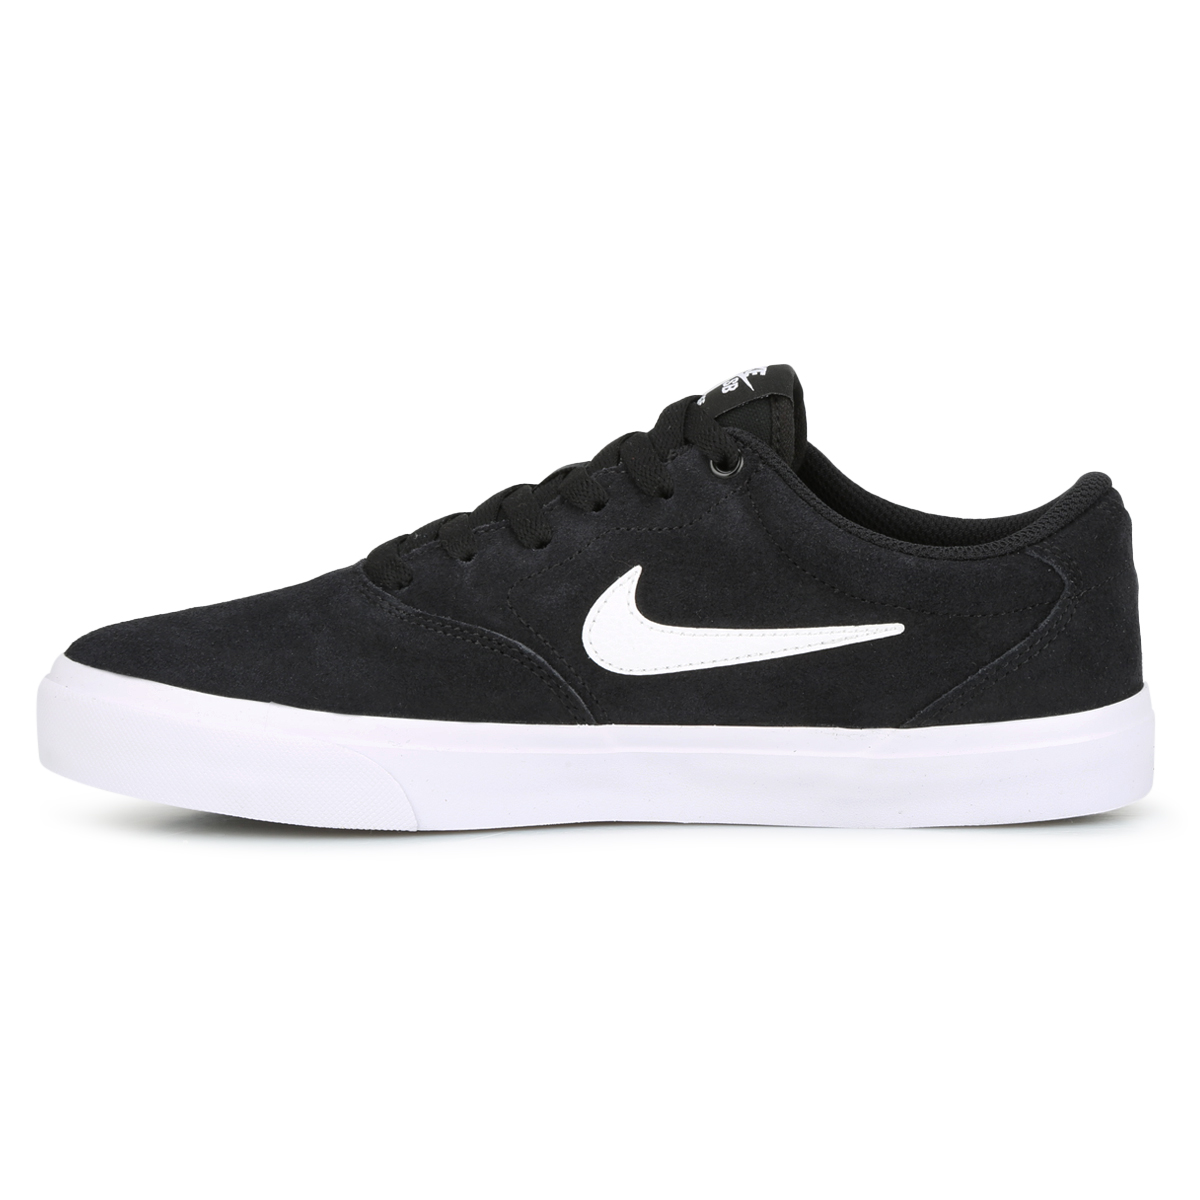 Zapatillas Nike Sb Charge Suede,  image number null